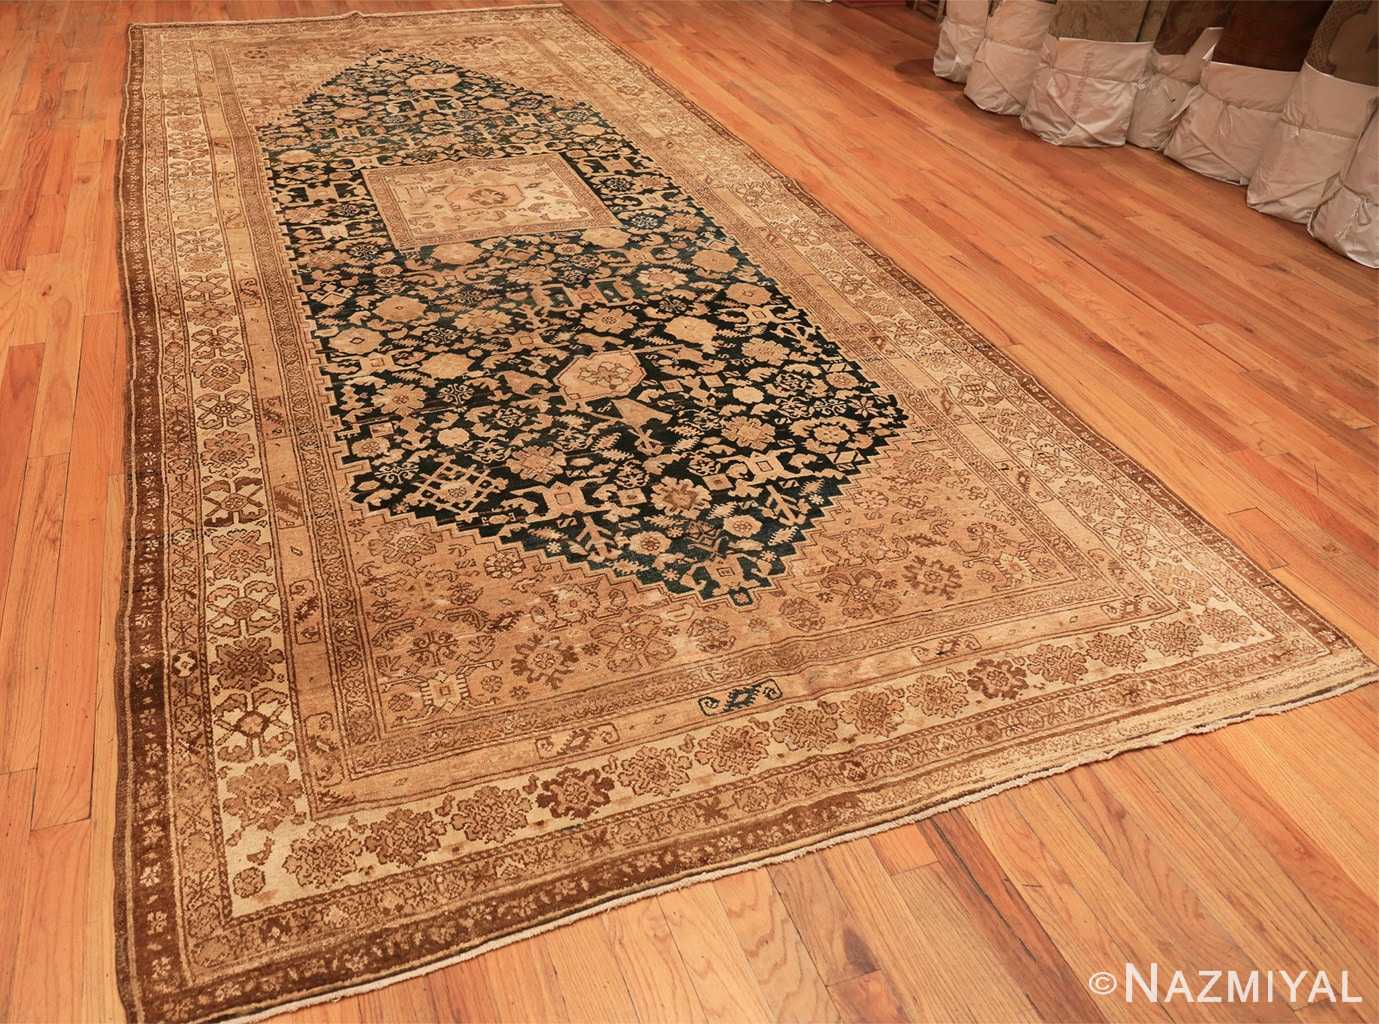 Full Antique gallery size tribal Persian Malayer rug 50469 by Nazmiyal Antique Rugs in NYC